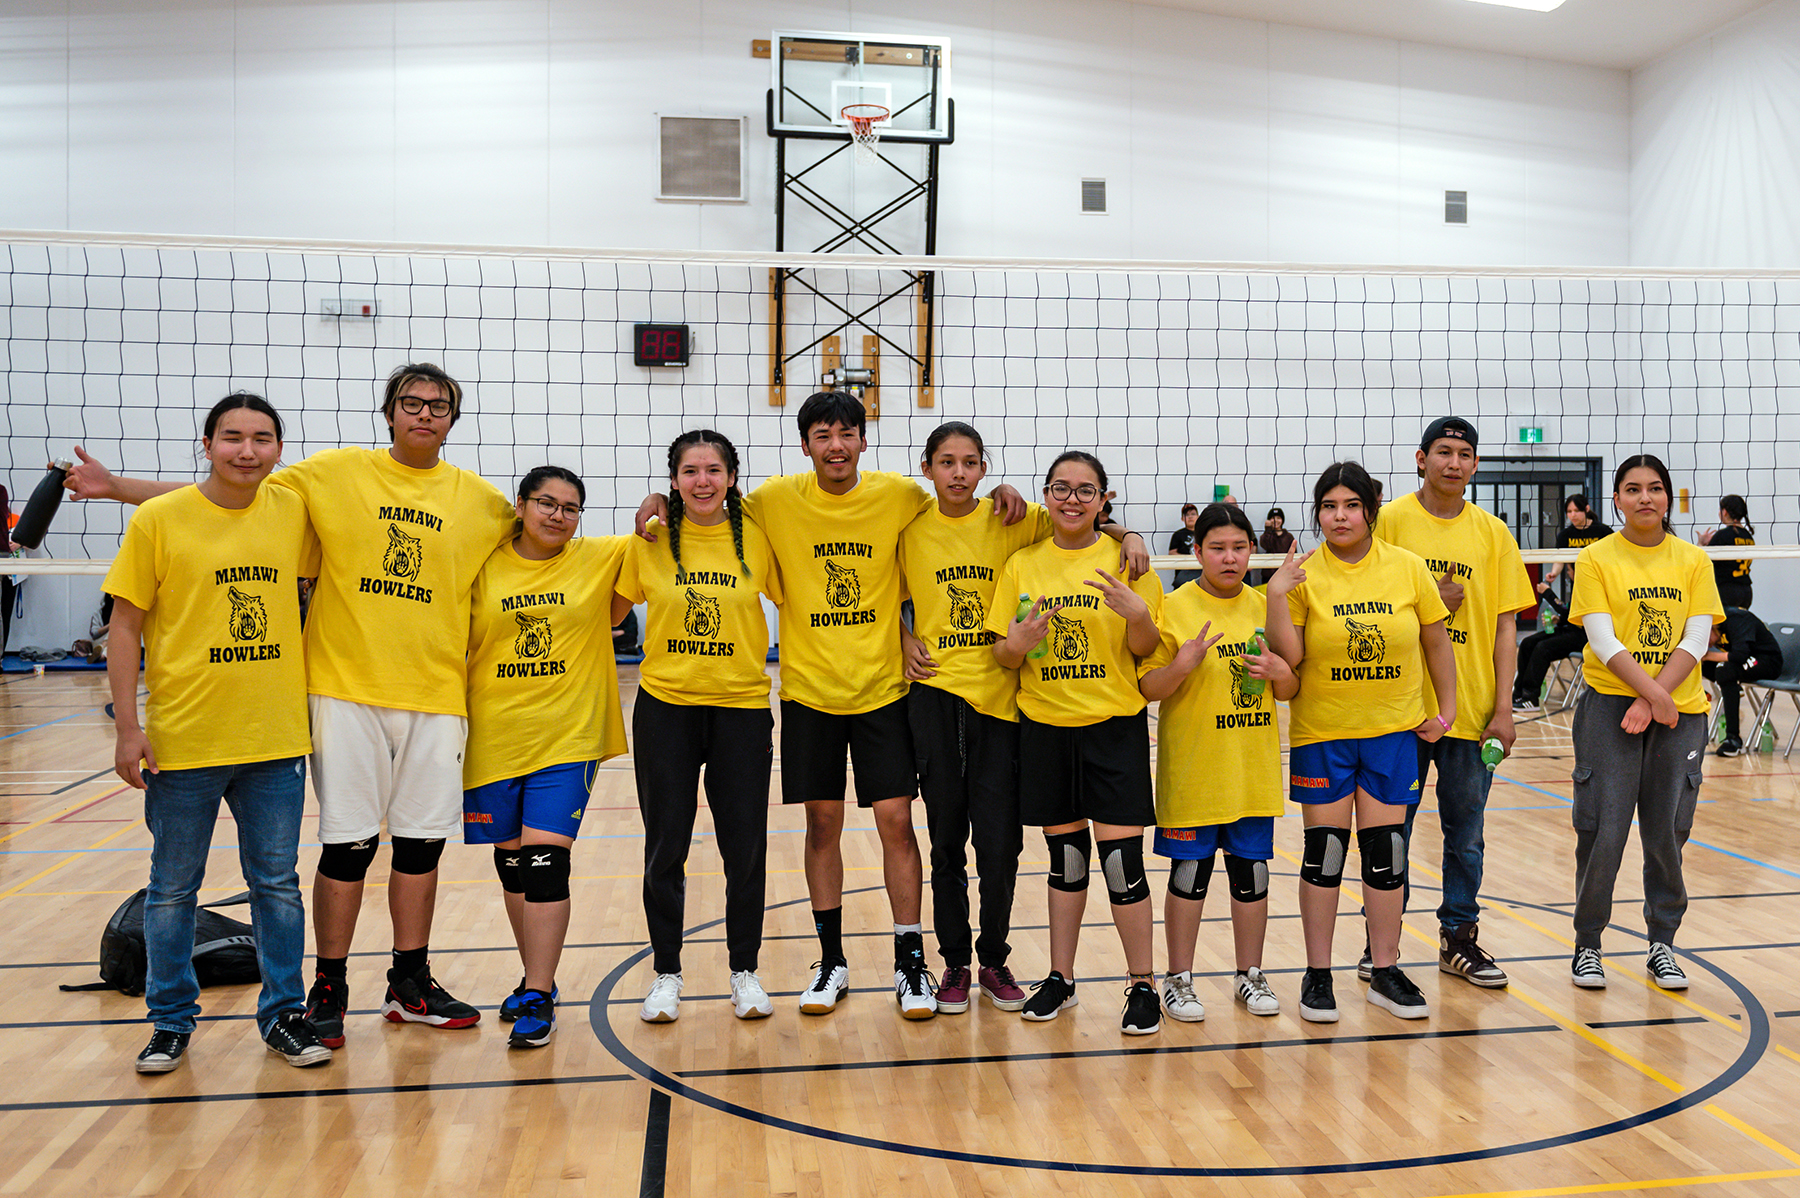 A co-ed group of young people wearing matching yellow shirts reading "Mamawi Howlers" stand in front of a volleyball net